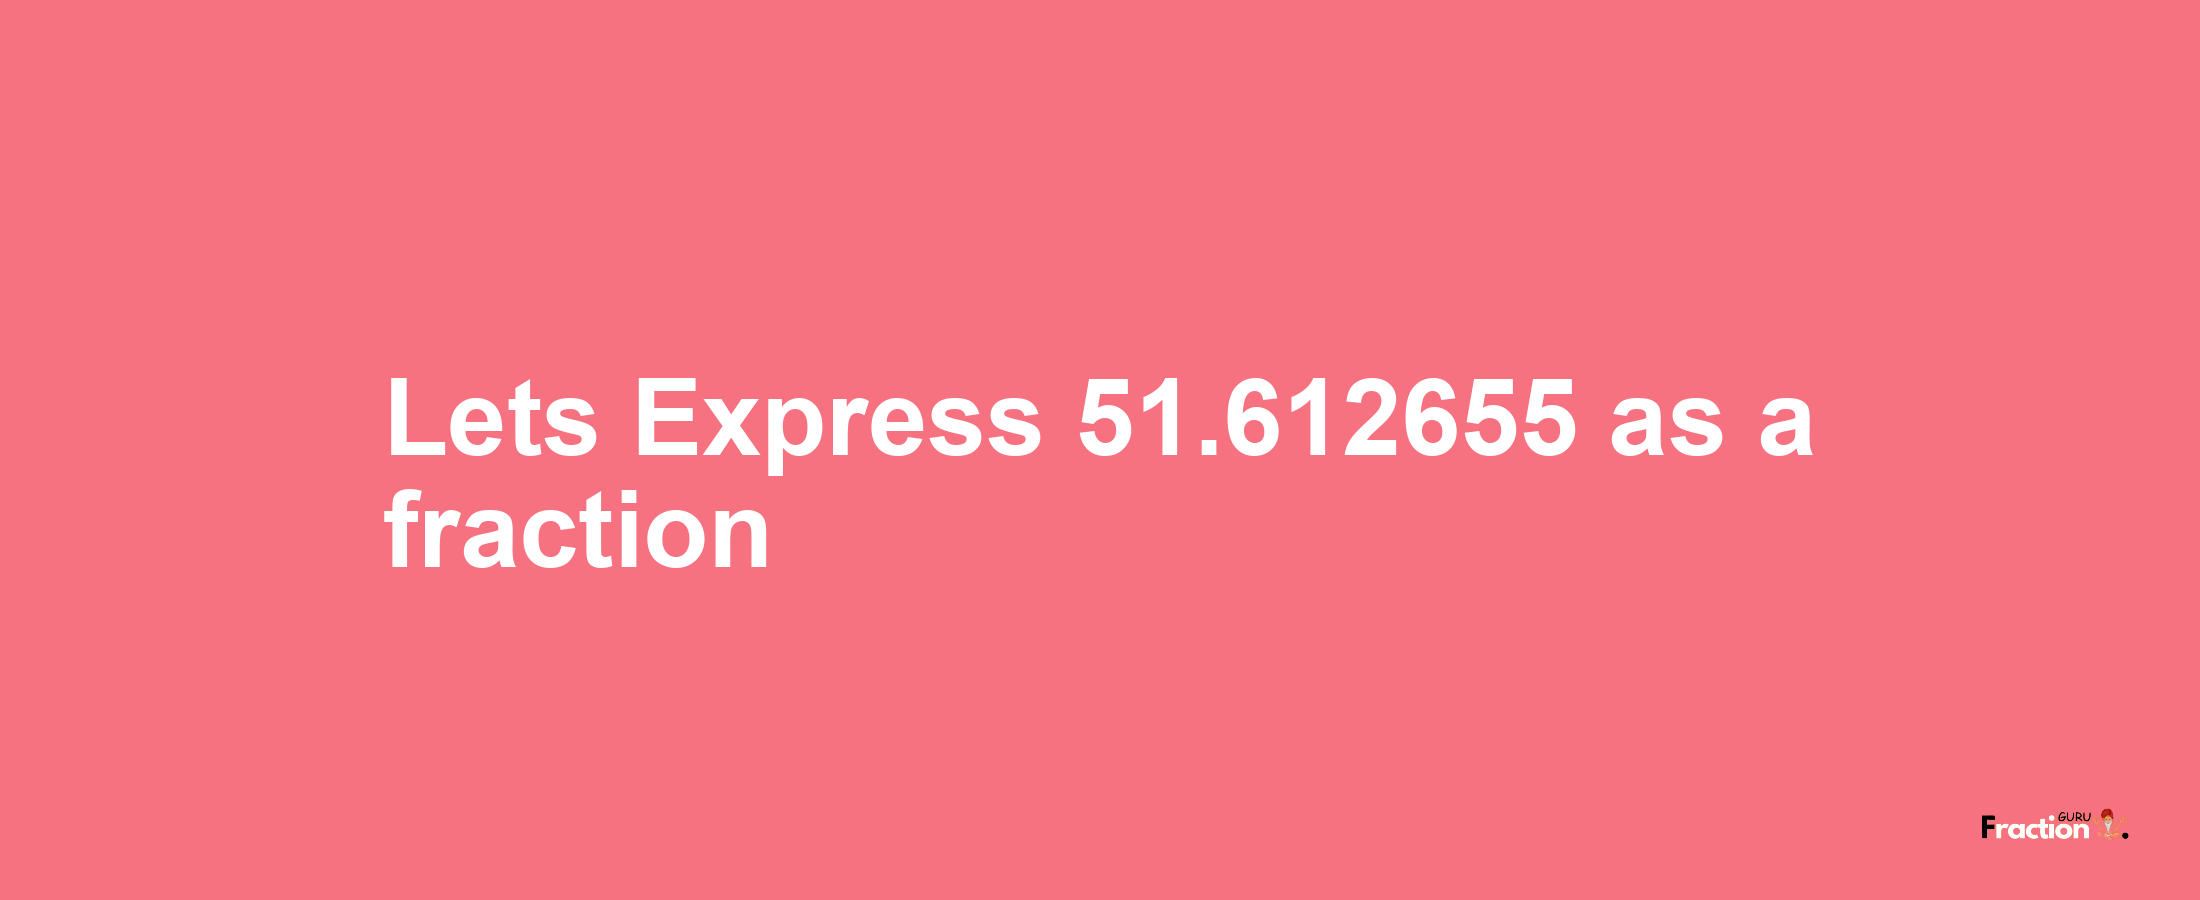 Lets Express 51.612655 as afraction